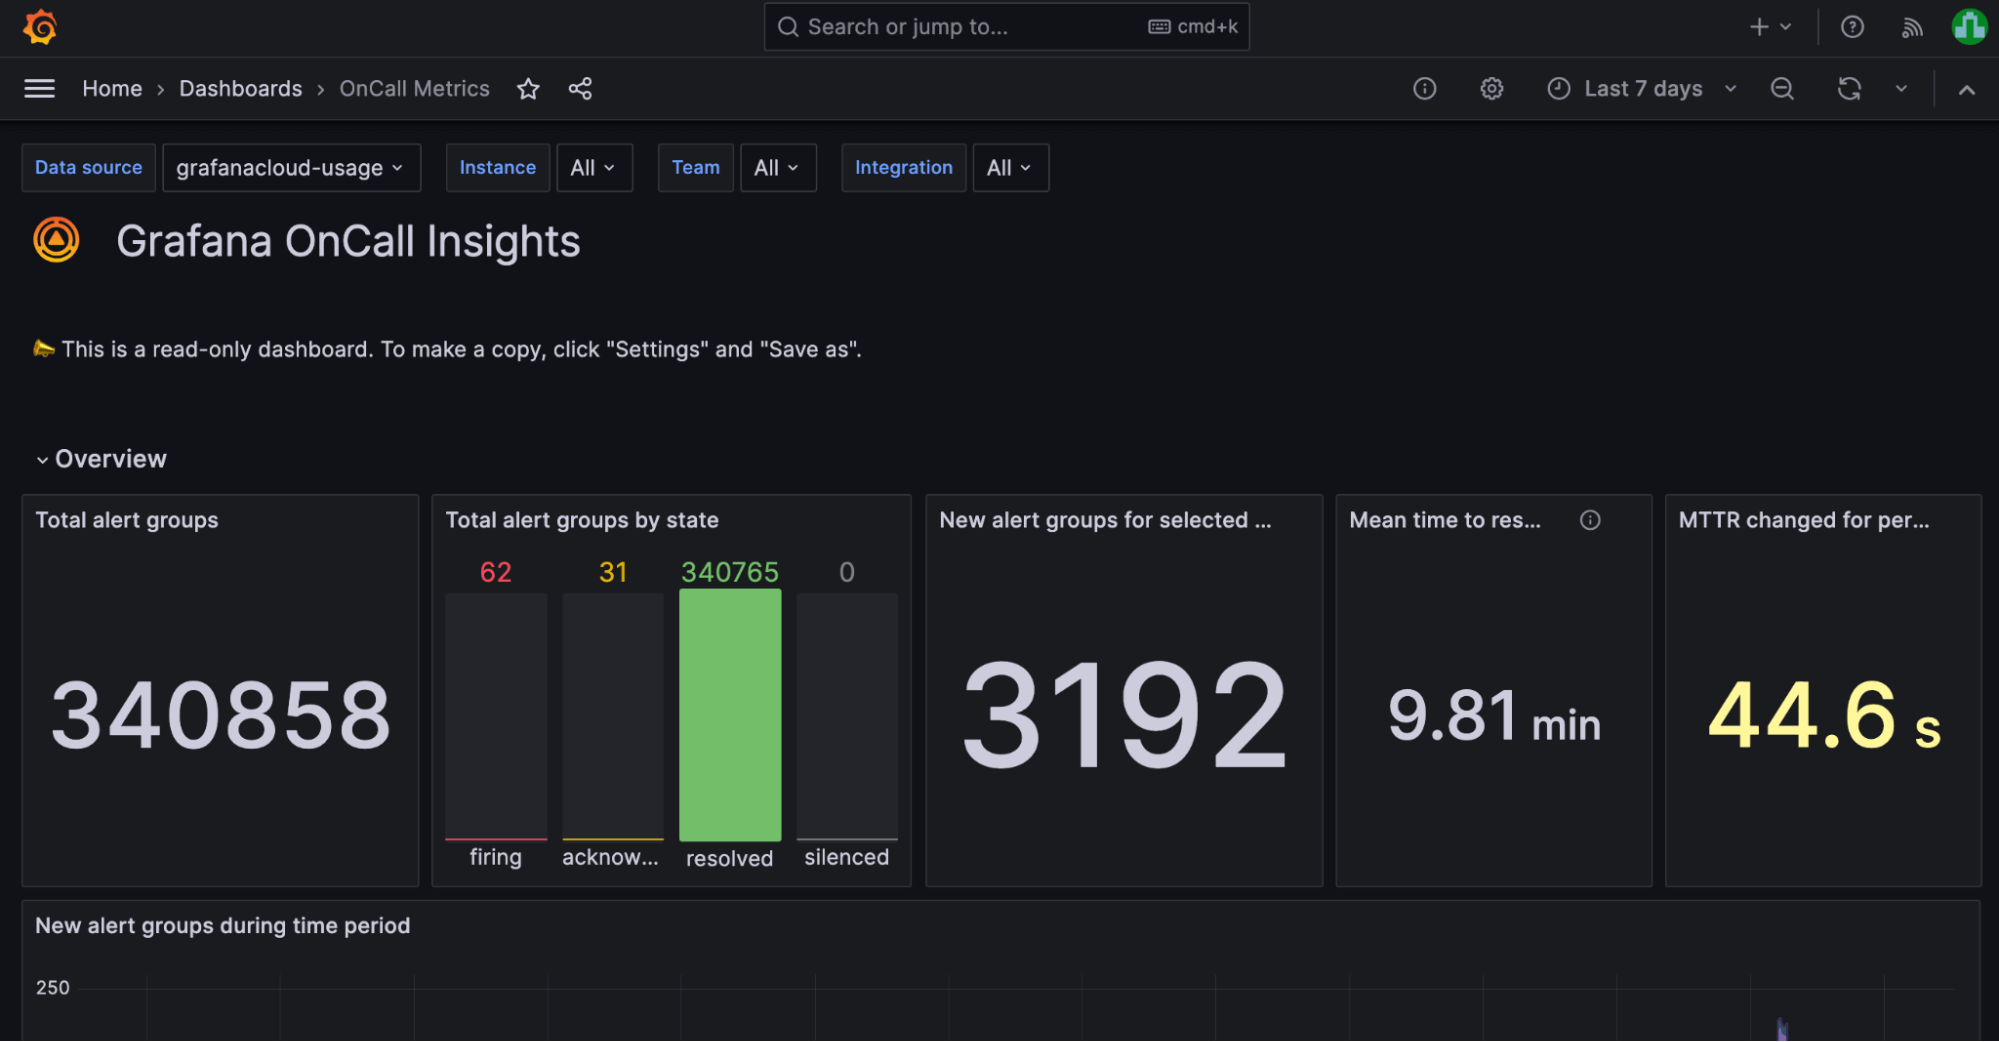 A screenshot of a read-only dashboard for Grafana OnCall Insights Metrics